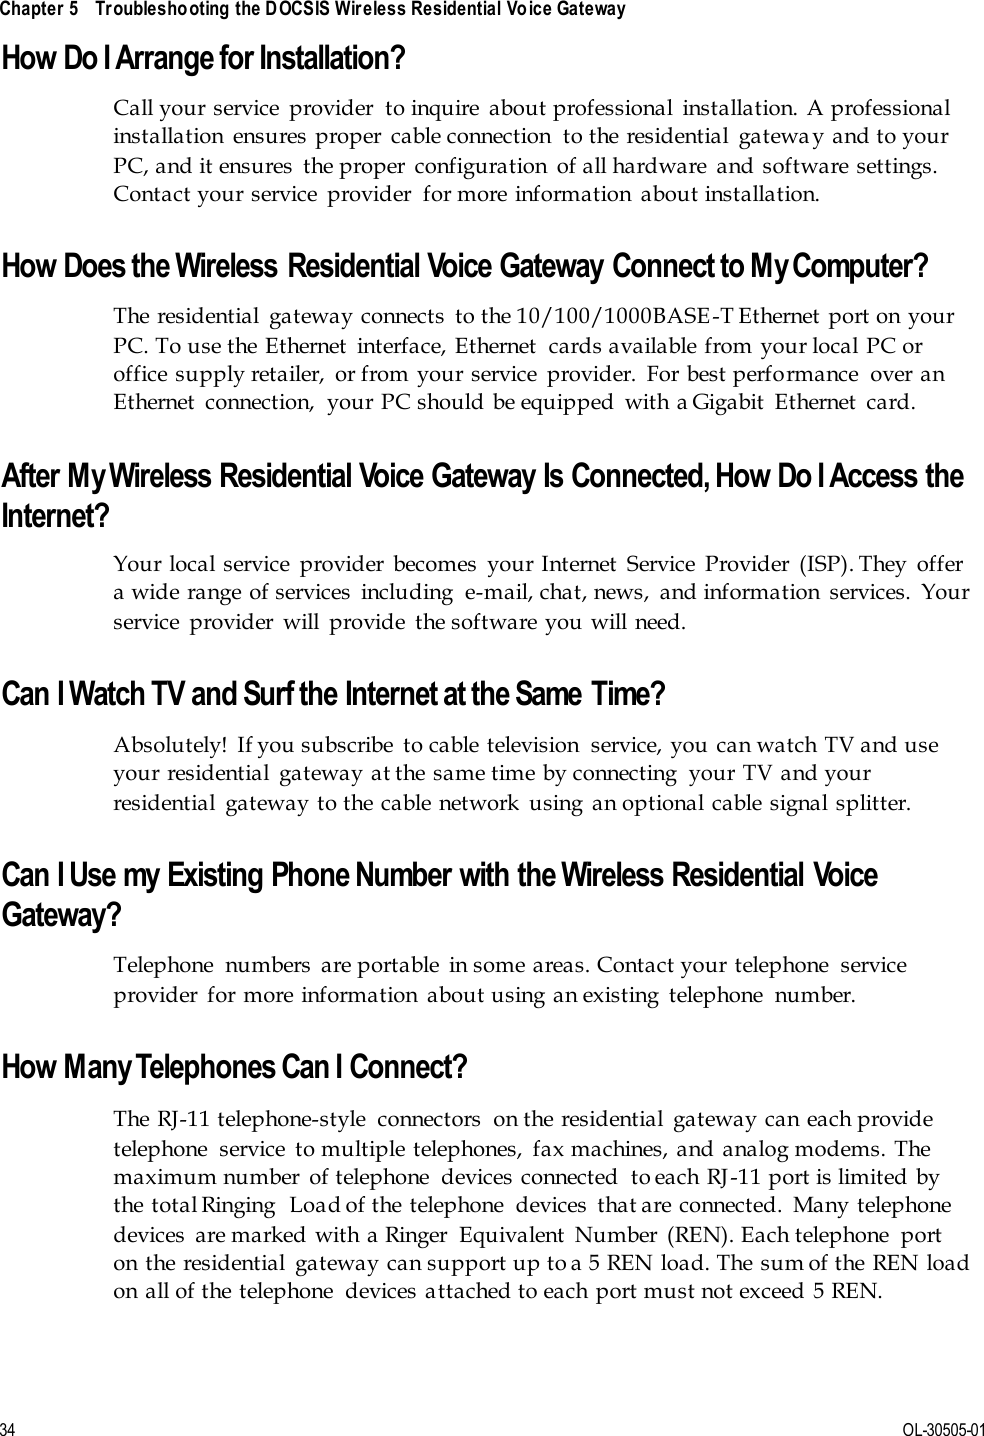  Chapter 5    Troubleshooting the DOCSIS Wireless Residential Voice Gateway      34 OL-30505-01 How Do I Arrange for Installation? Call your  service  provider  to inquire  about professional  installation.  A professional installation  ensures proper  cable connection  to the residential  gateway and to your PC, and it ensures  the proper  configuration  of all hardware  and  software  settings. Contact your service  provider  for more  information  about installation.  How Does the Wireless Residential Voice Gateway Connect to My Computer? The  residential  gateway connects  to the 10/100/1000BASE-T Ethernet  port on your PC. To use the Ethernet  interface, Ethernet  cards available from your local PC or office supply retailer,  or from  your service  provider.  For best performance  over an Ethernet  connection,  your PC should  be equipped  with a Gigabit  Ethernet  card.   After My Wireless Residential Voice Gateway Is Connected, How Do I Access the Internet? Your  local service  provider  becomes  your Internet  Service  Provider  (ISP). They  offer a wide range  of services  including  e-mail, chat, news,  and information  services.  Your service  provider  will  provide  the software you will need.  Can I Watch TV and Surf the Internet at the Same Time? Absolutely!  If you subscribe  to cable television  service, you can watch TV and use your residential  gateway at the same time by connecting  your TV and your residential  gateway to the cable network  using an optional cable  signal splitter.  Can I Use my Existing Phone Number with the Wireless Residential Voice Gateway?  Telephone  numbers  are portable  in some areas. Contact your telephone  service provider  for more  information  about using an existing  telephone  number.  How Many Telephones Can I Connect?  The  RJ-11 telephone-style  connectors  on the residential  gateway can each provide telephone  service  to multiple  telephones,  fax machines, and  analog modems. The maximum number  of telephone  devices  connected  to each RJ-11 port is limited  by the total Ringing  Load of the  telephone  devices  that are connected.  Many telephone devices  are marked with a Ringer  Equivalent  Number  (REN). Each telephone  port on  the residential  gateway can support up to a 5 REN load. The  sum of the  REN load on  all of the telephone  devices attached to each  port must not exceed 5 REN.  